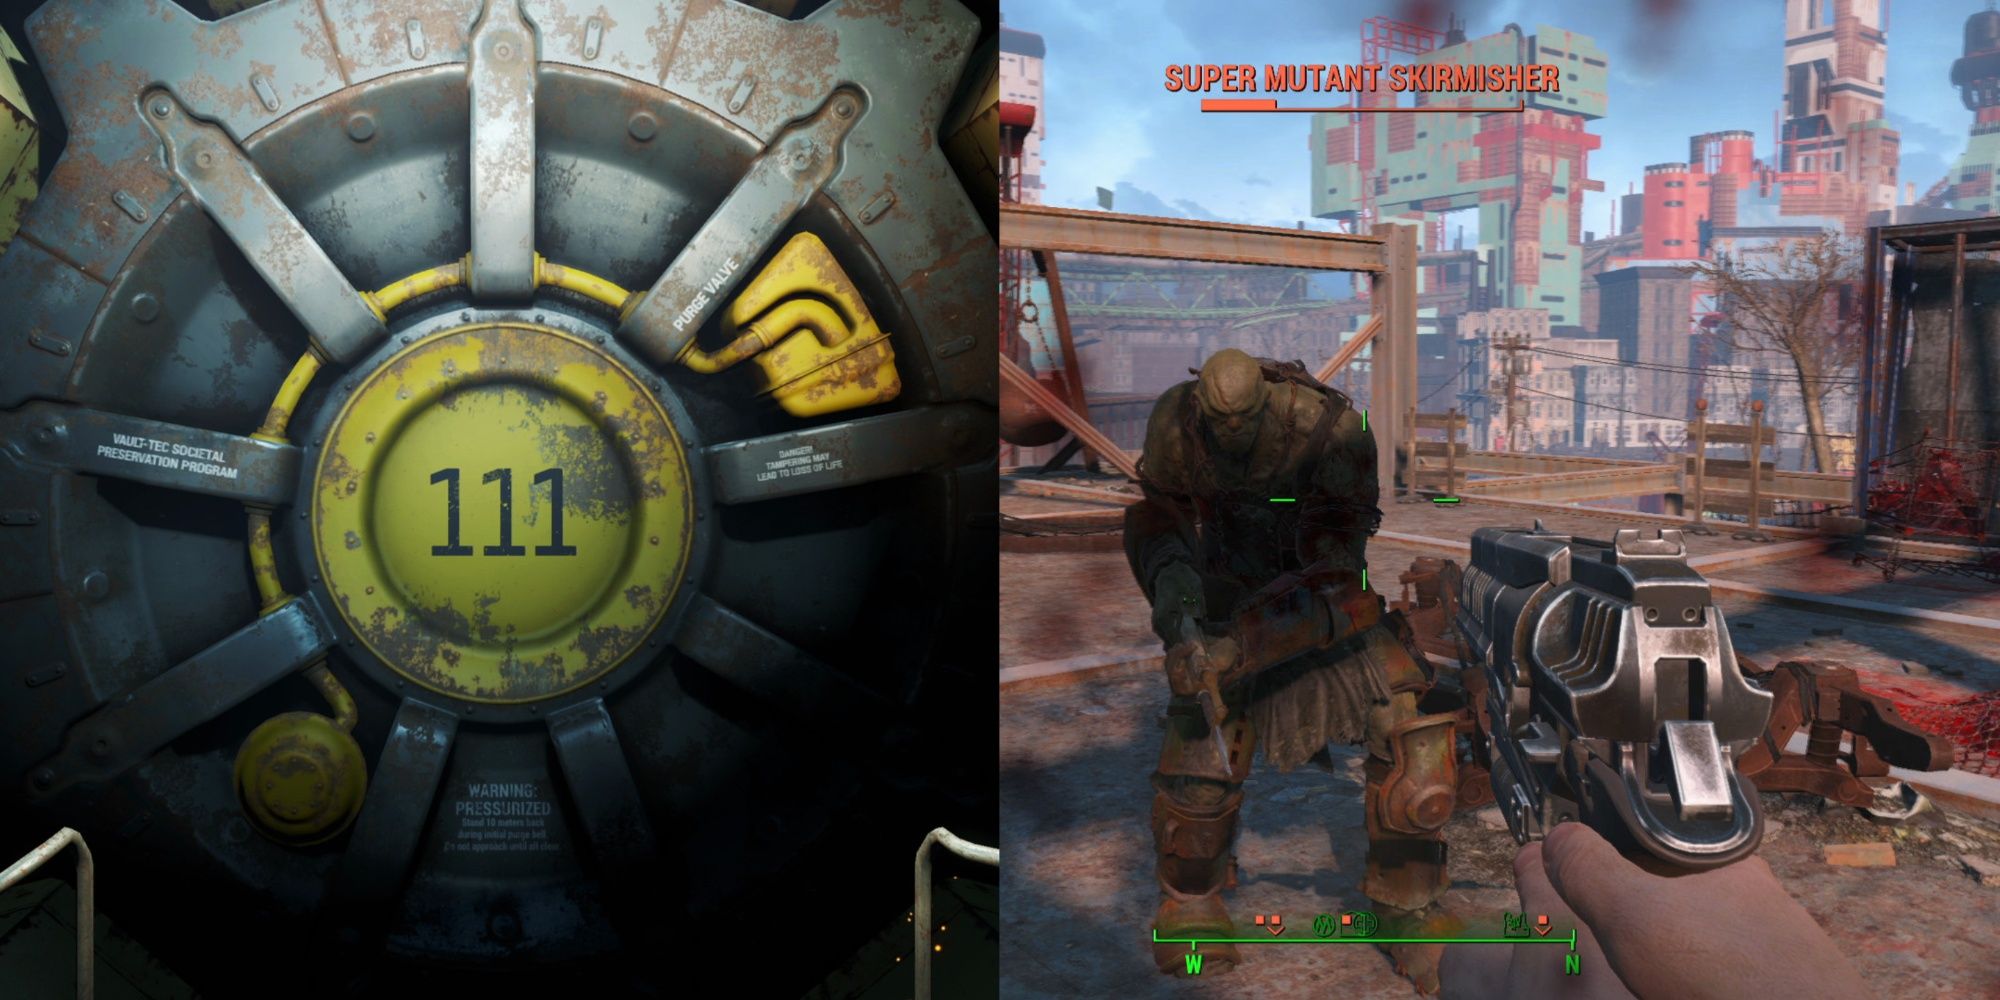 Vault 111 and character pointing a pistol at super mutant in Fallout 4